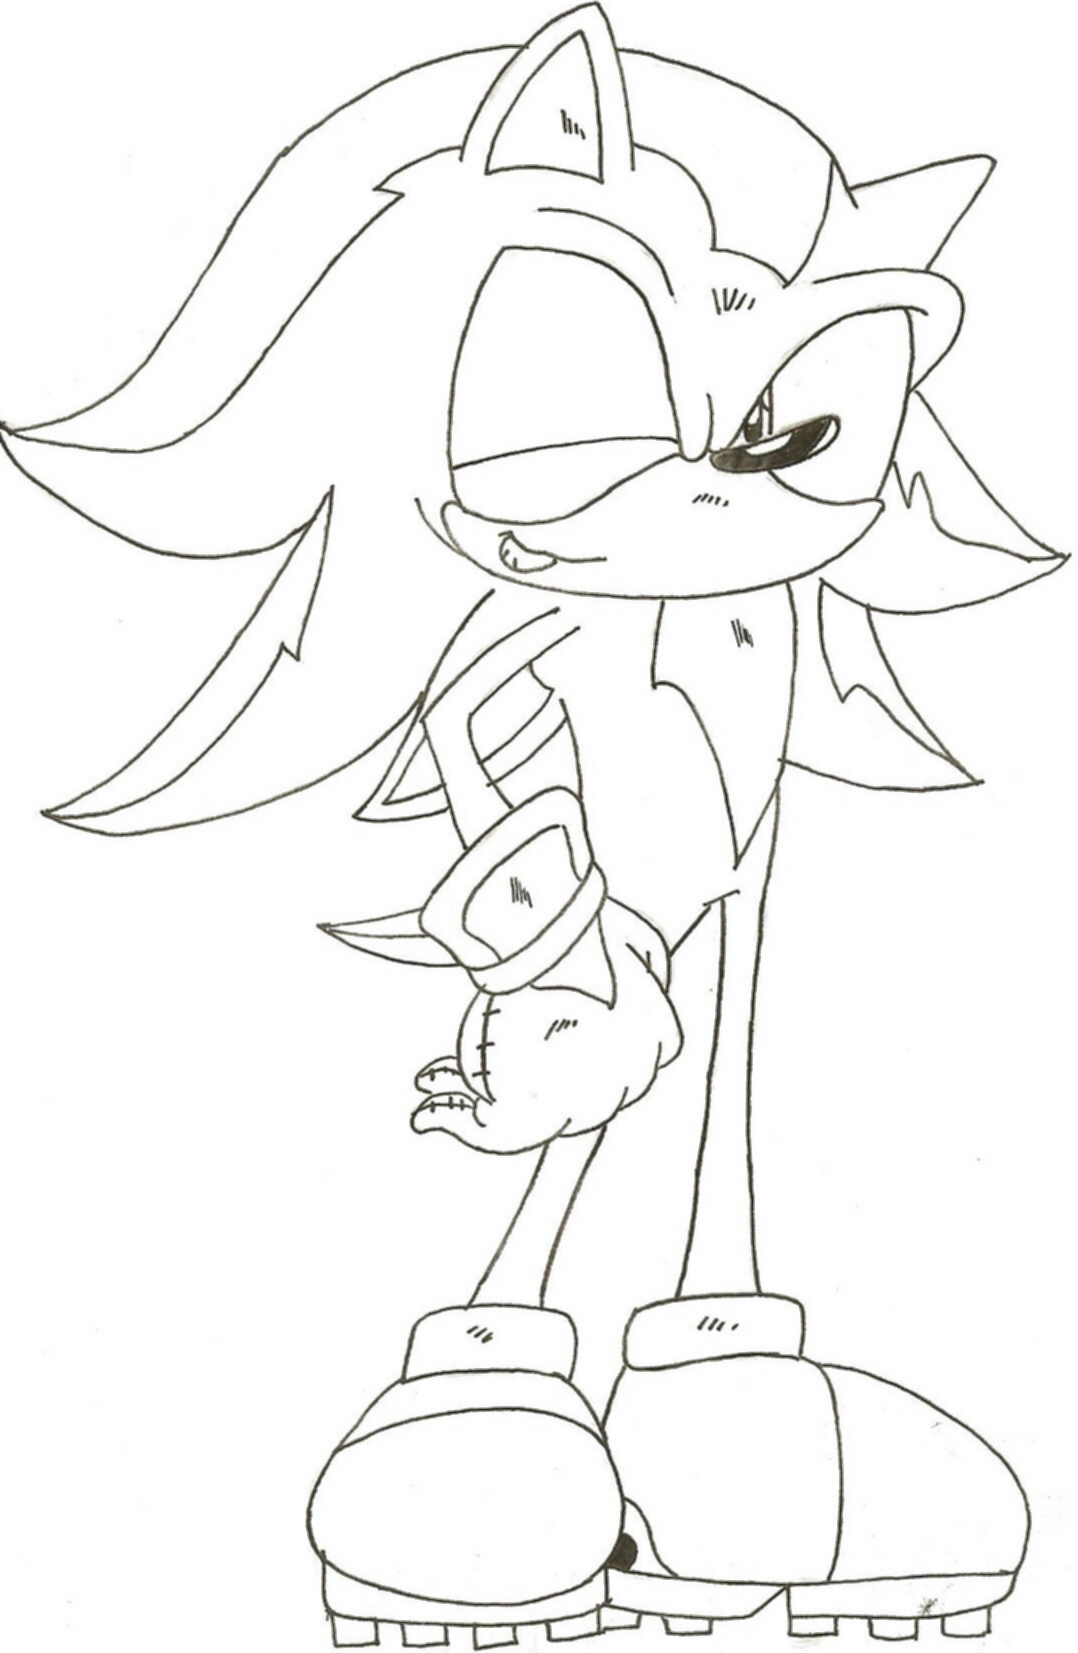 Keite the Hedgehog by jkgoomba89